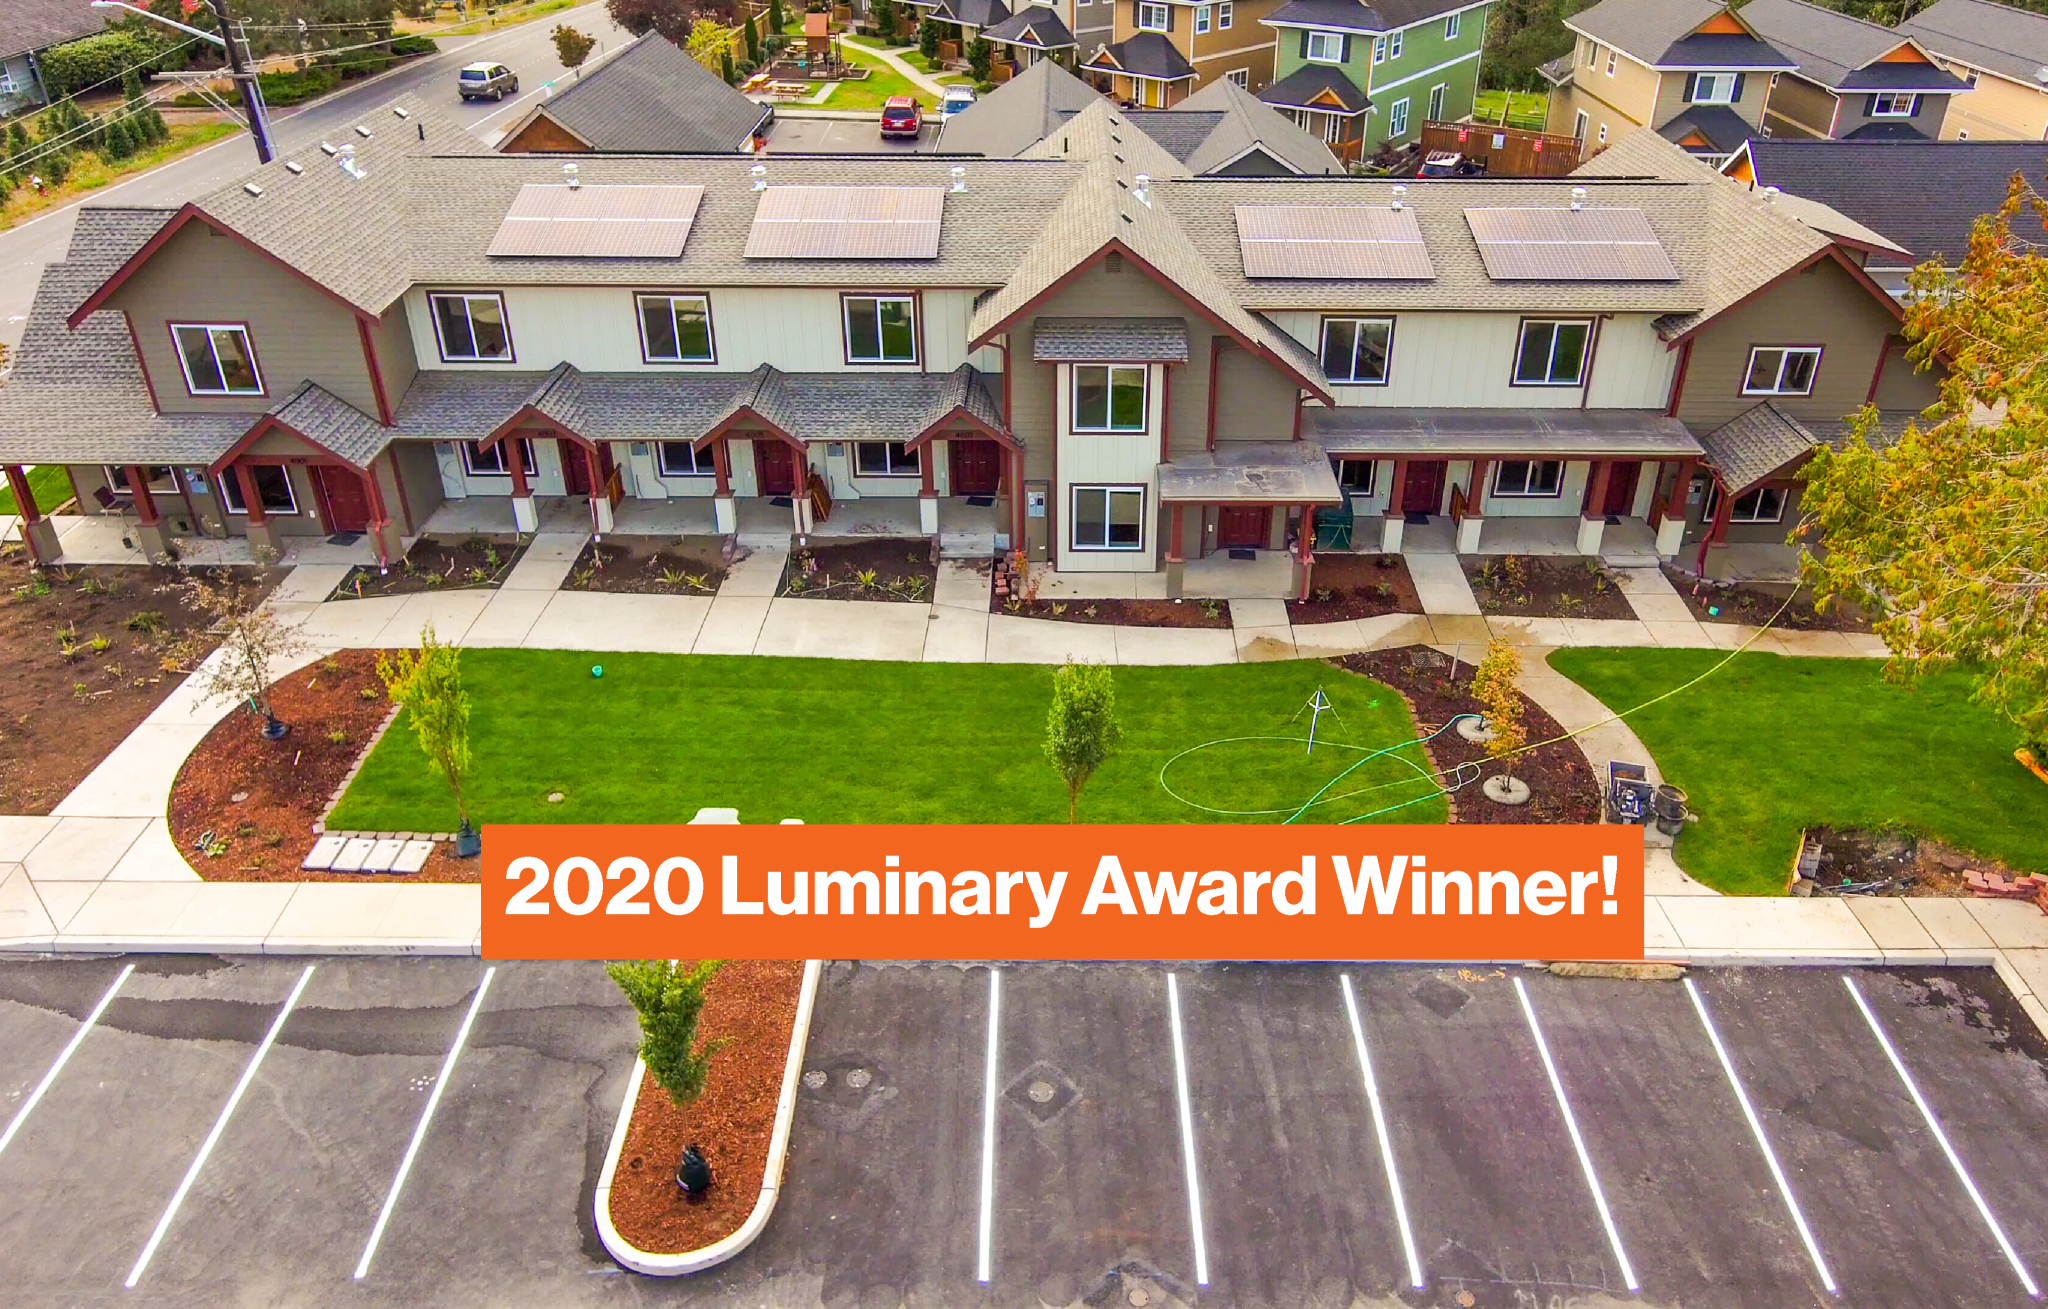 The Telegraph Townhomes Wins the Luminary Awards for Impactful Project!